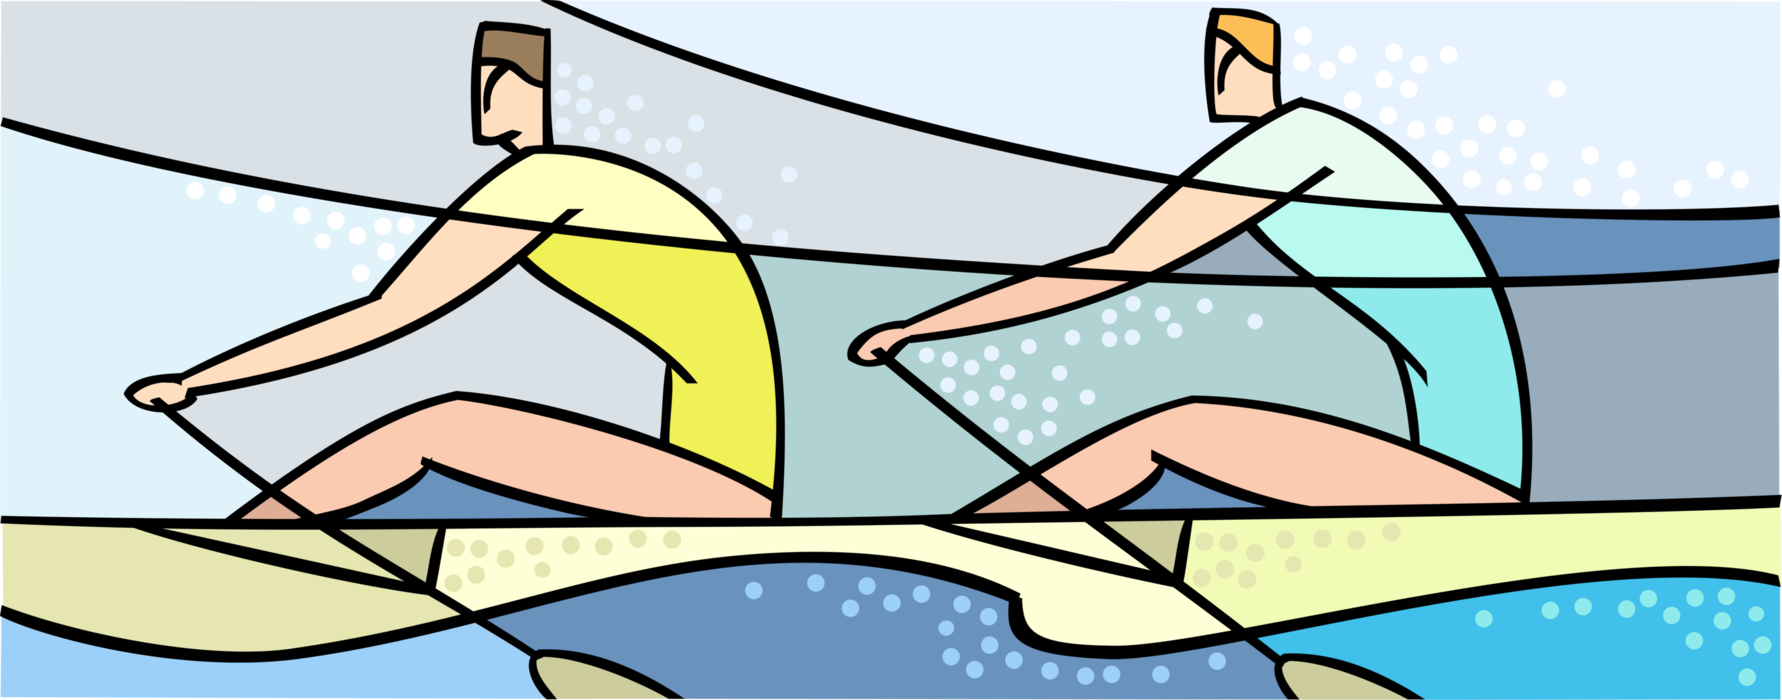 Vector Illustration of Double Sculls with Oars in Sculling Boat Race